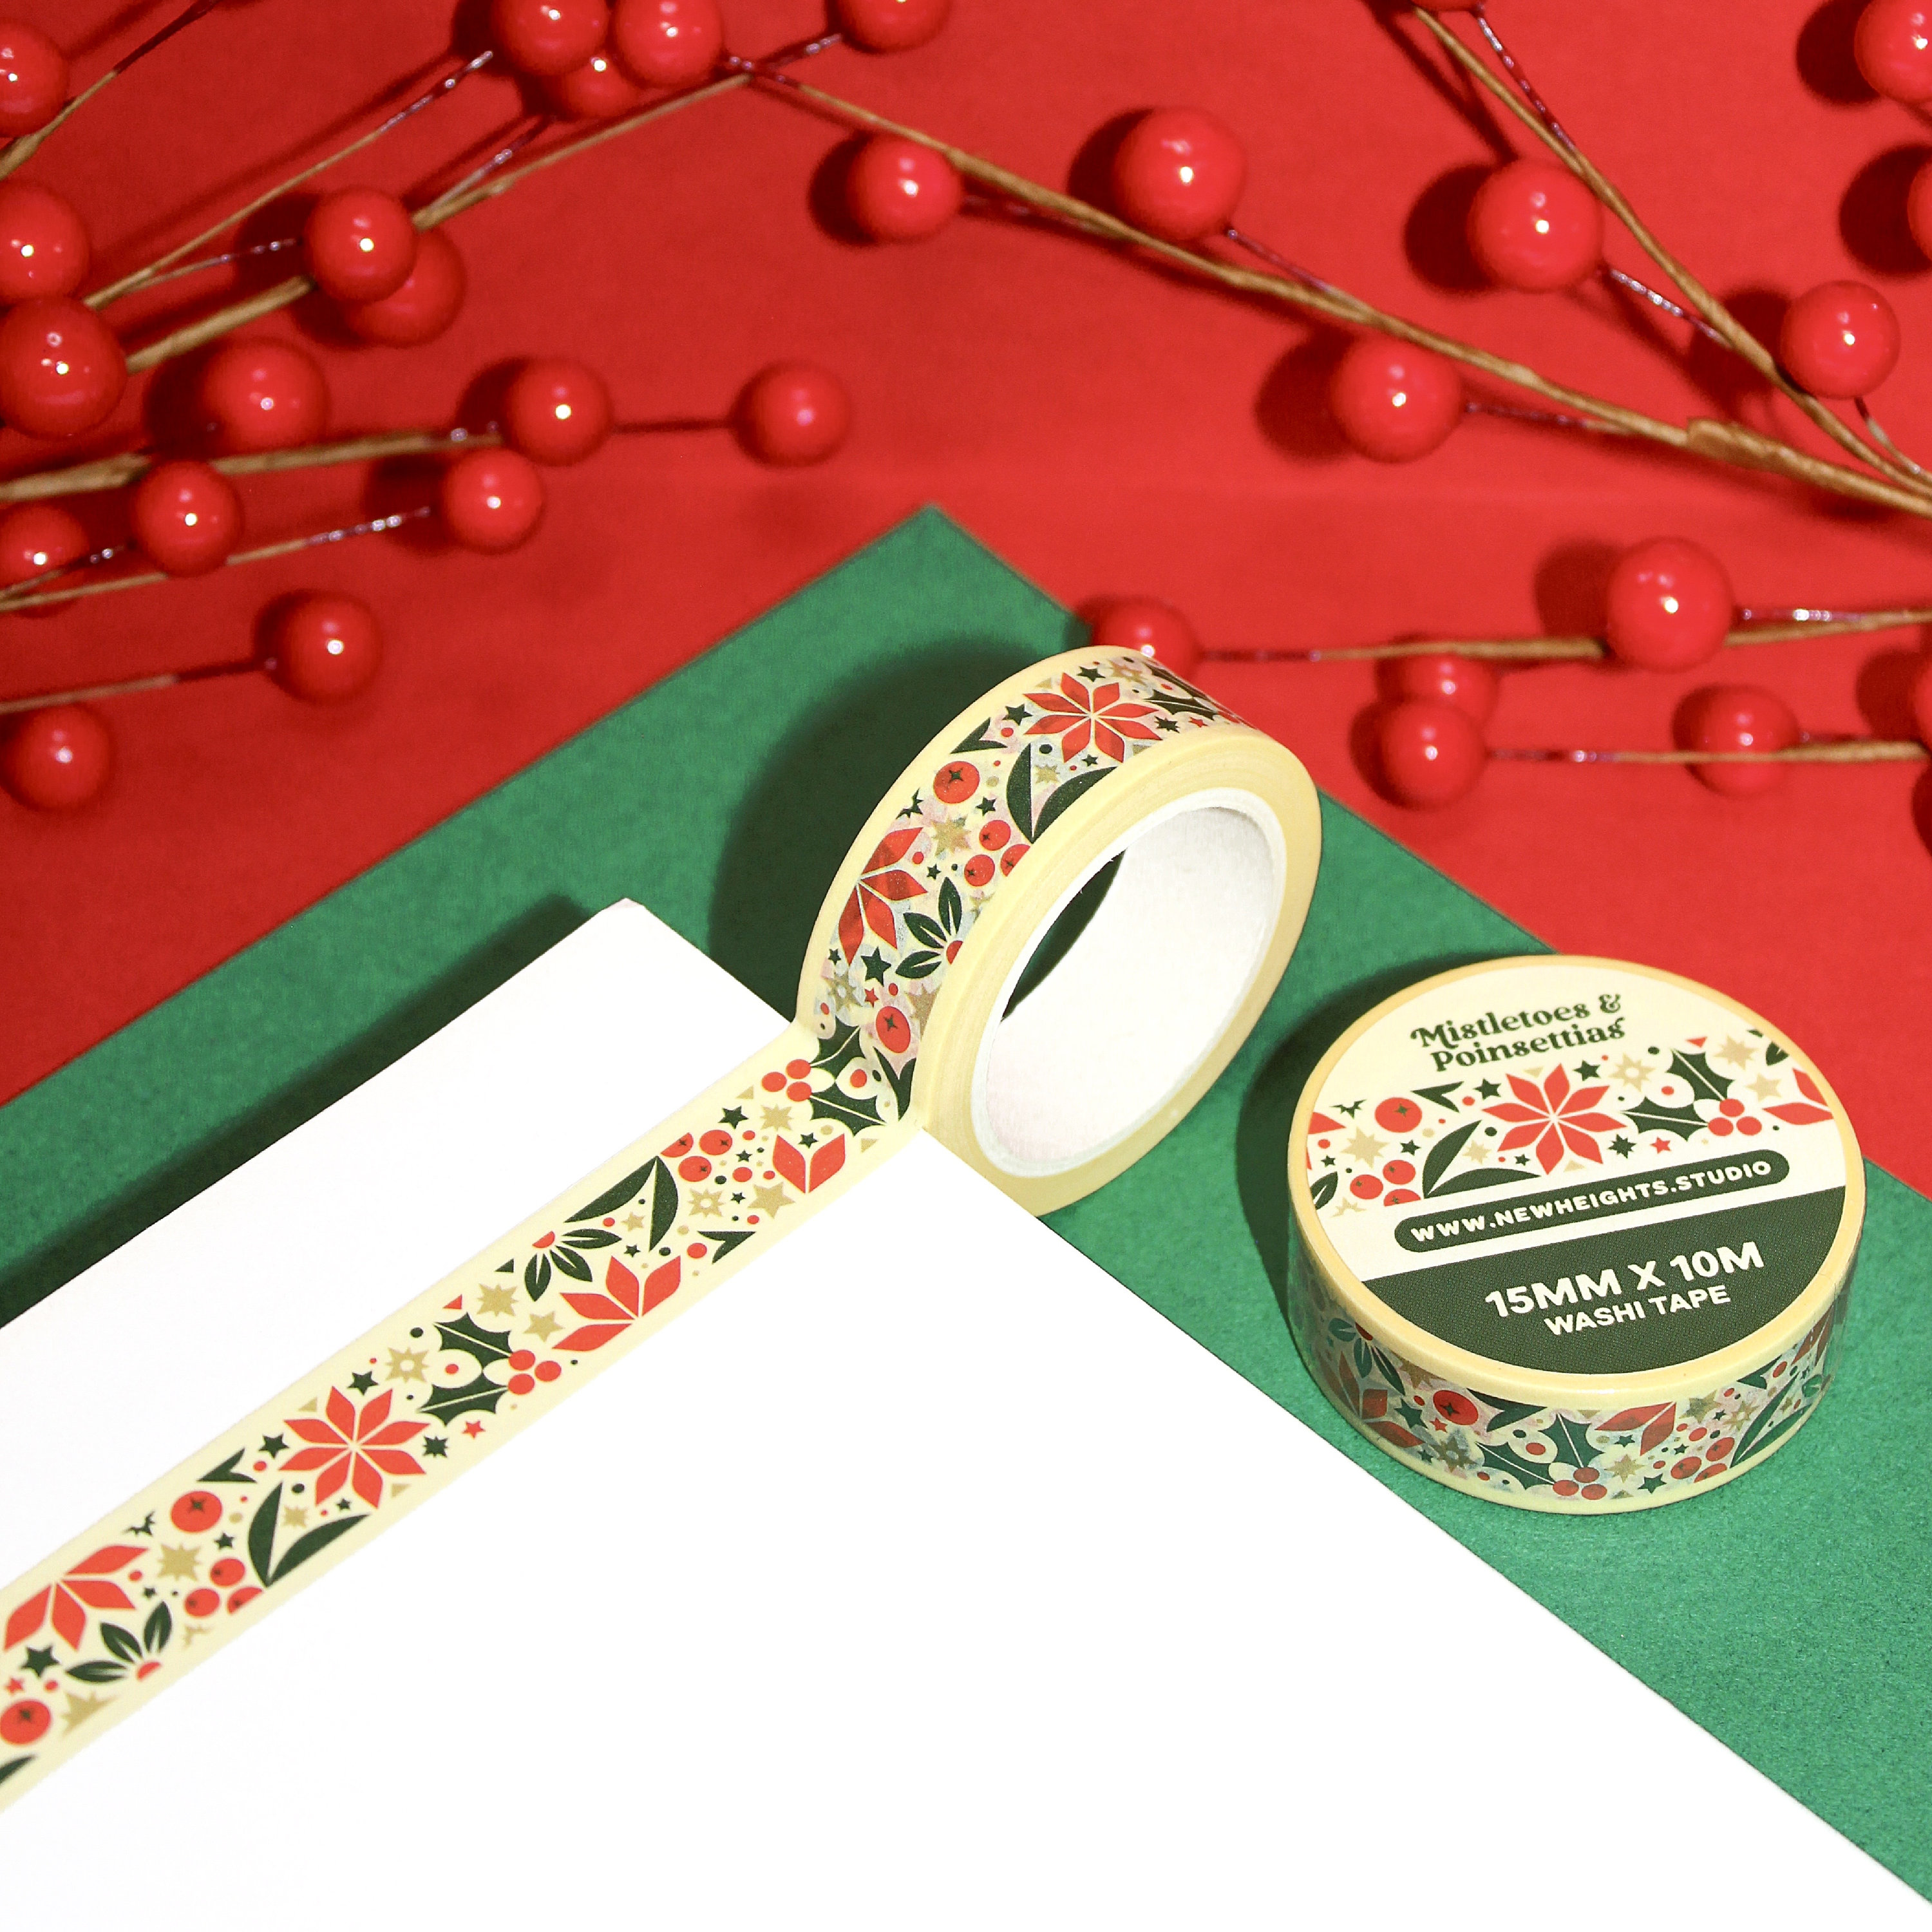 8 Rolls Christmas Holiday Foil Washi Tape Set with Snowflake Tree Deer  Striped for Journaling Christmas